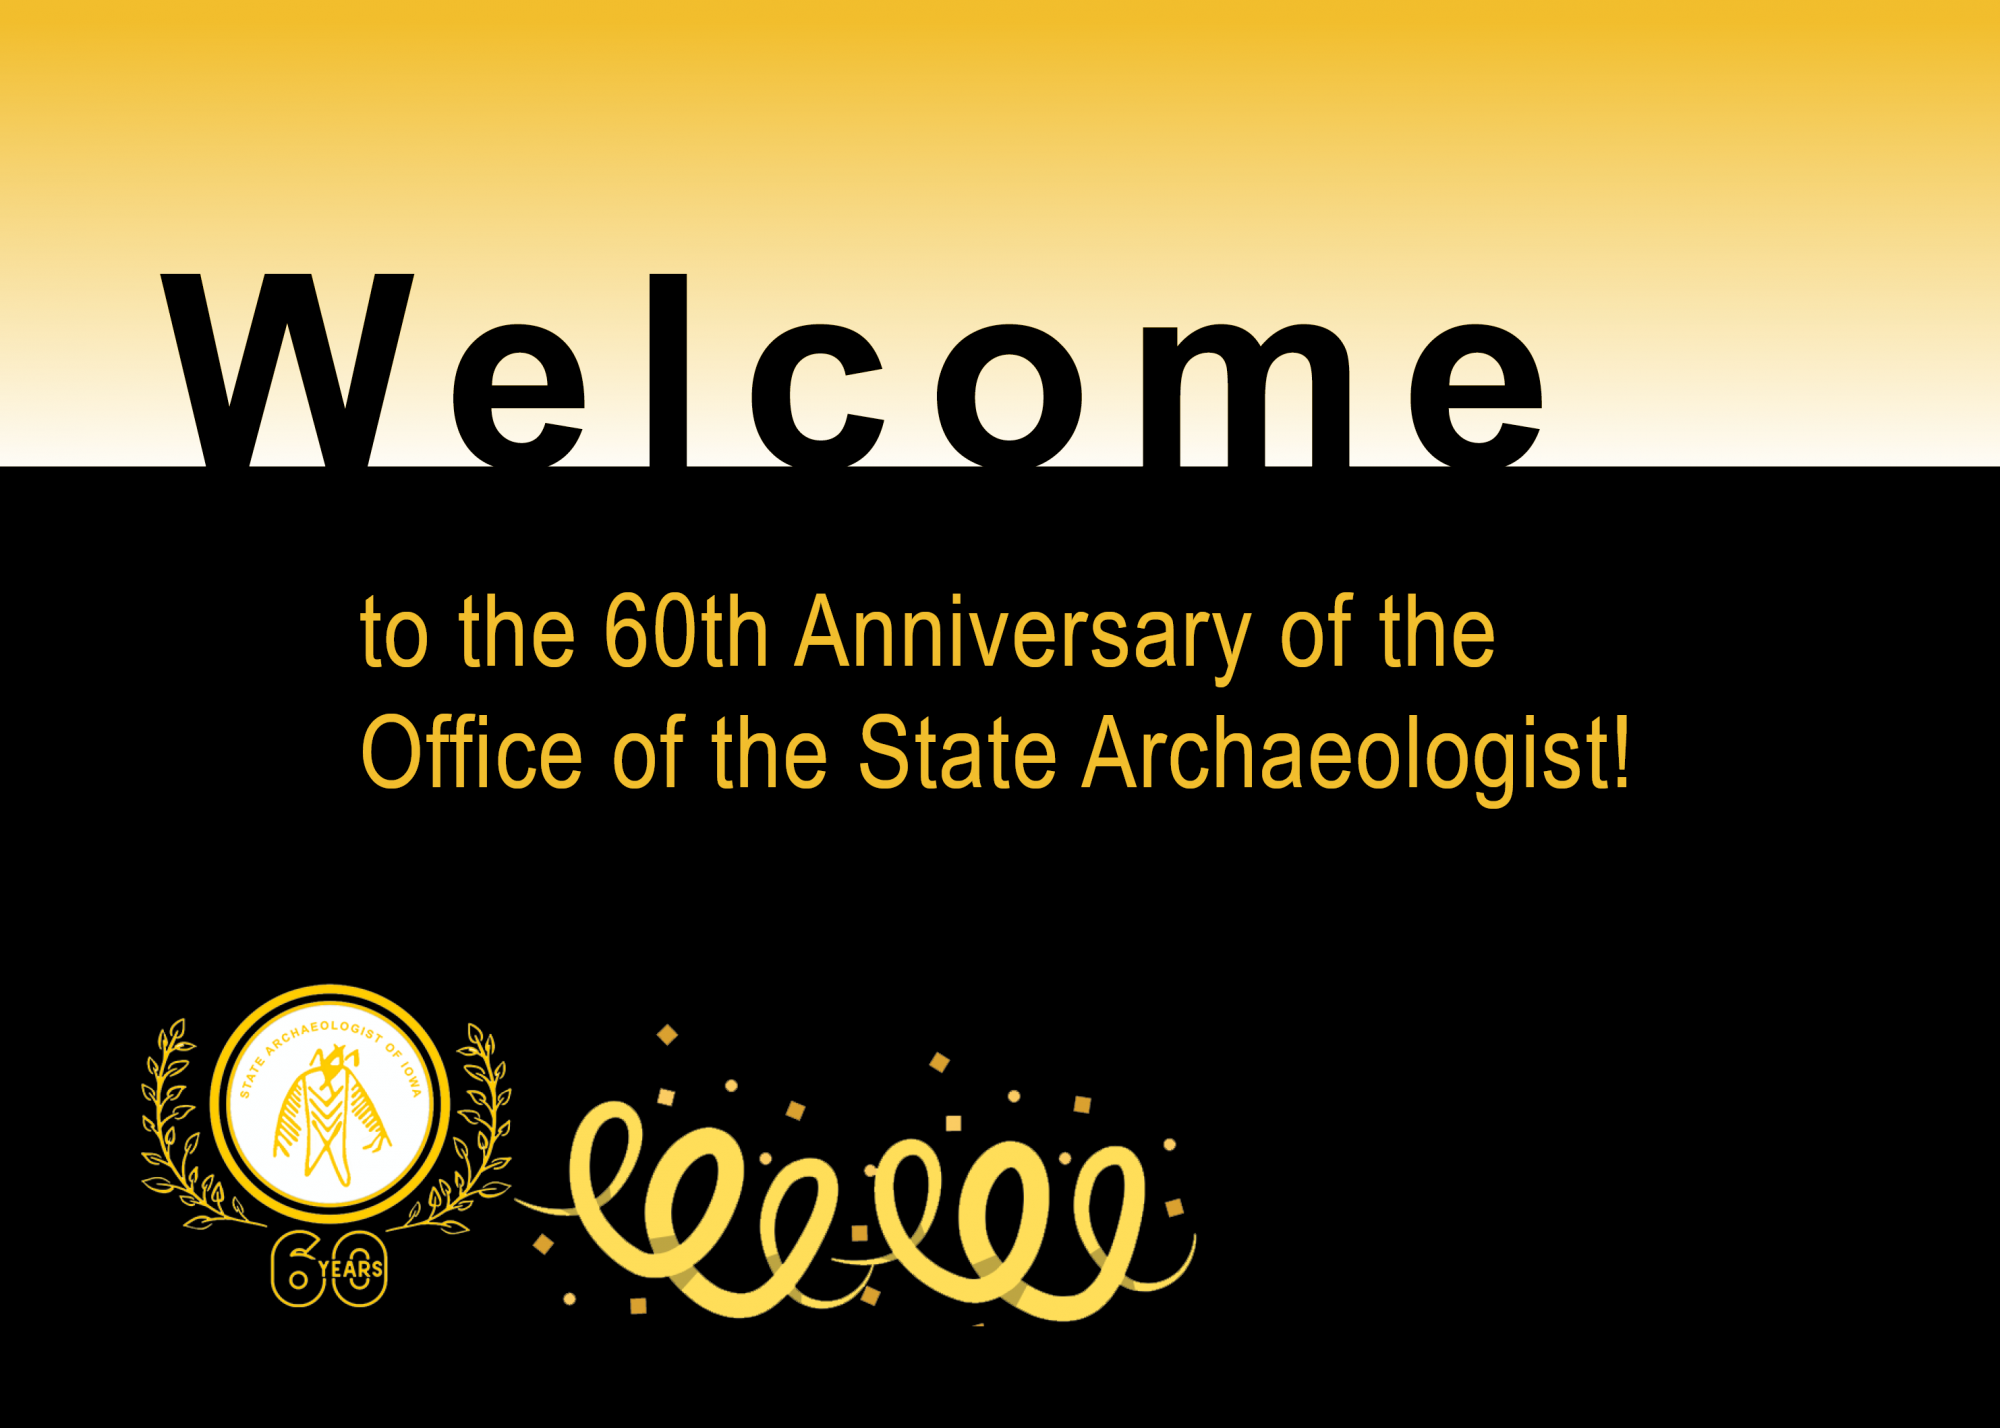 Welcome to the 60th Anniversary of the Office of the State Archaeologist